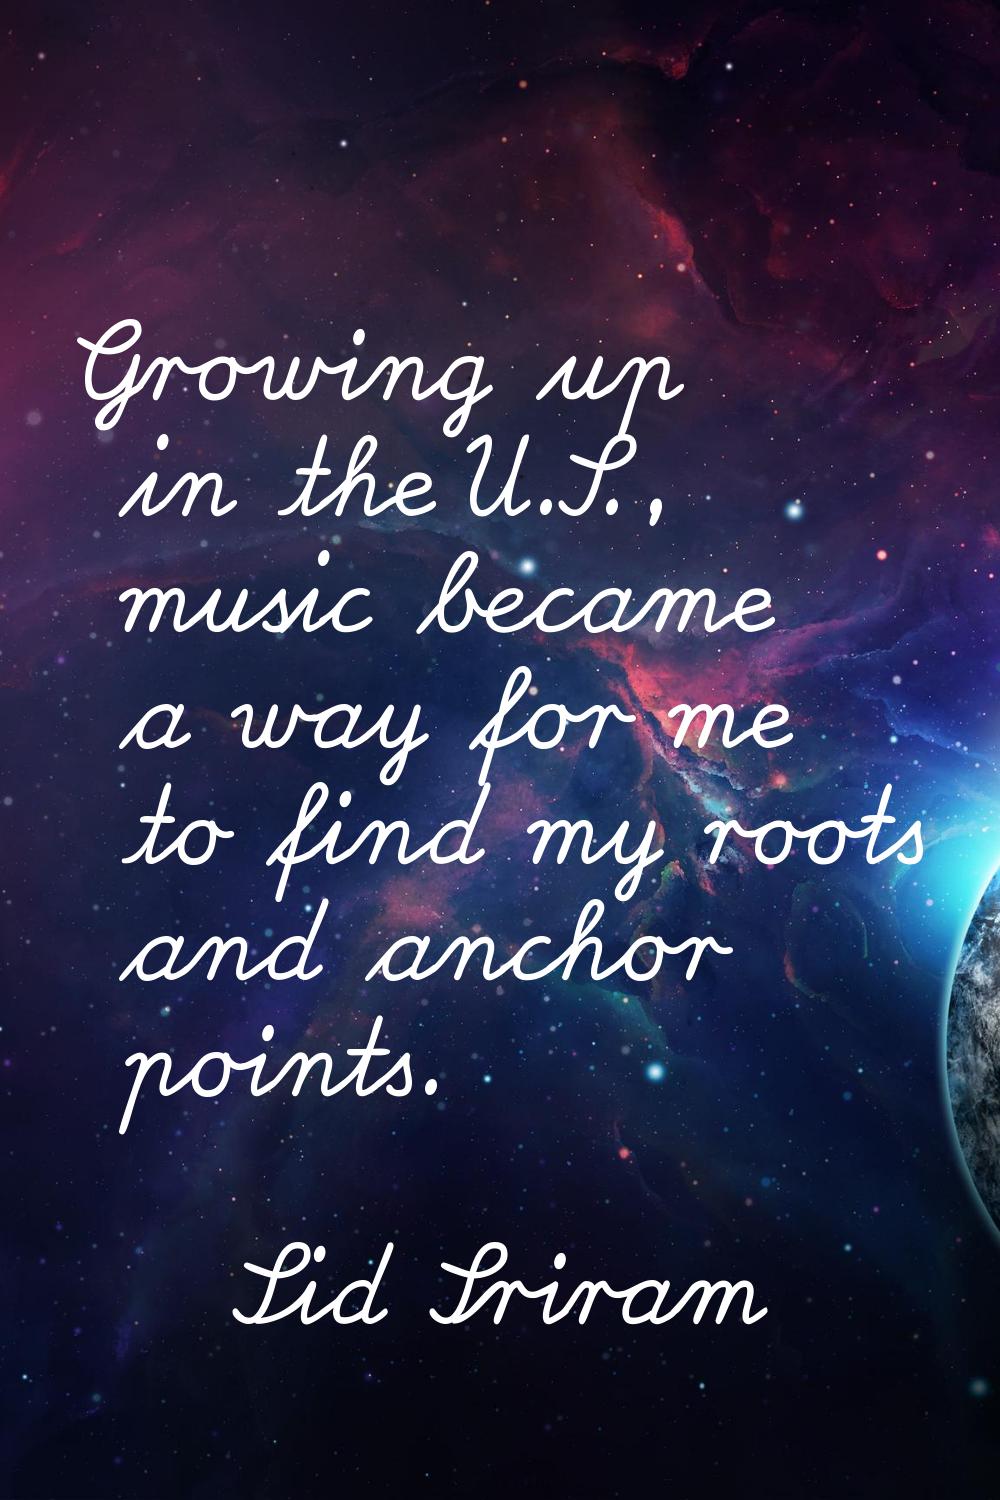 Growing up in the U.S., music became a way for me to find my roots and anchor points.